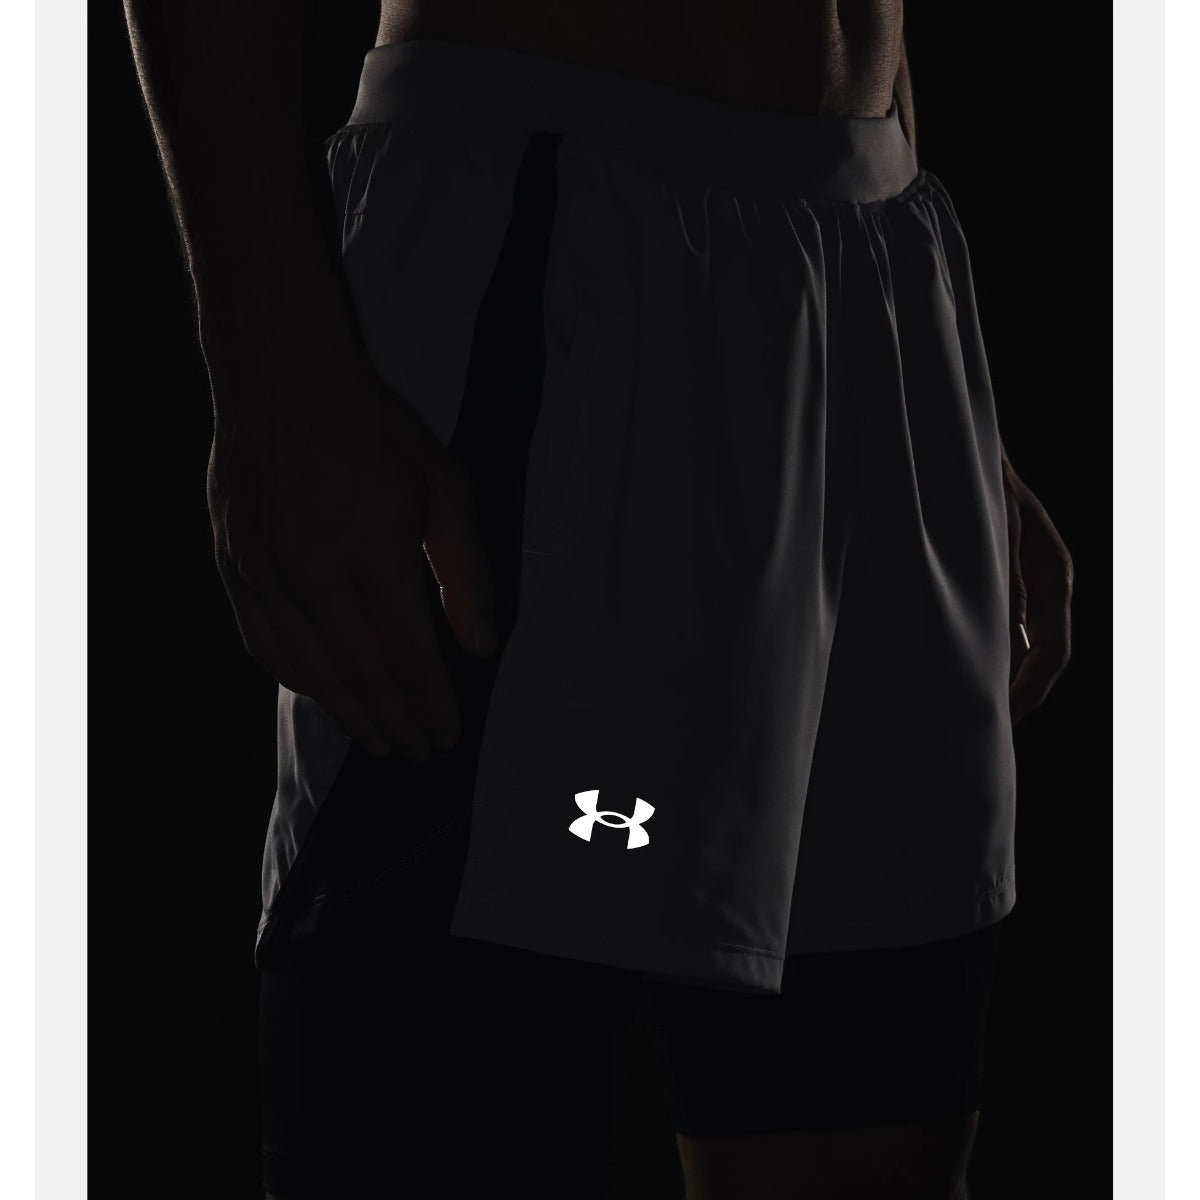 Under Armour Launch 5'' 2 in 1 Shorts Men's (Grey 011)